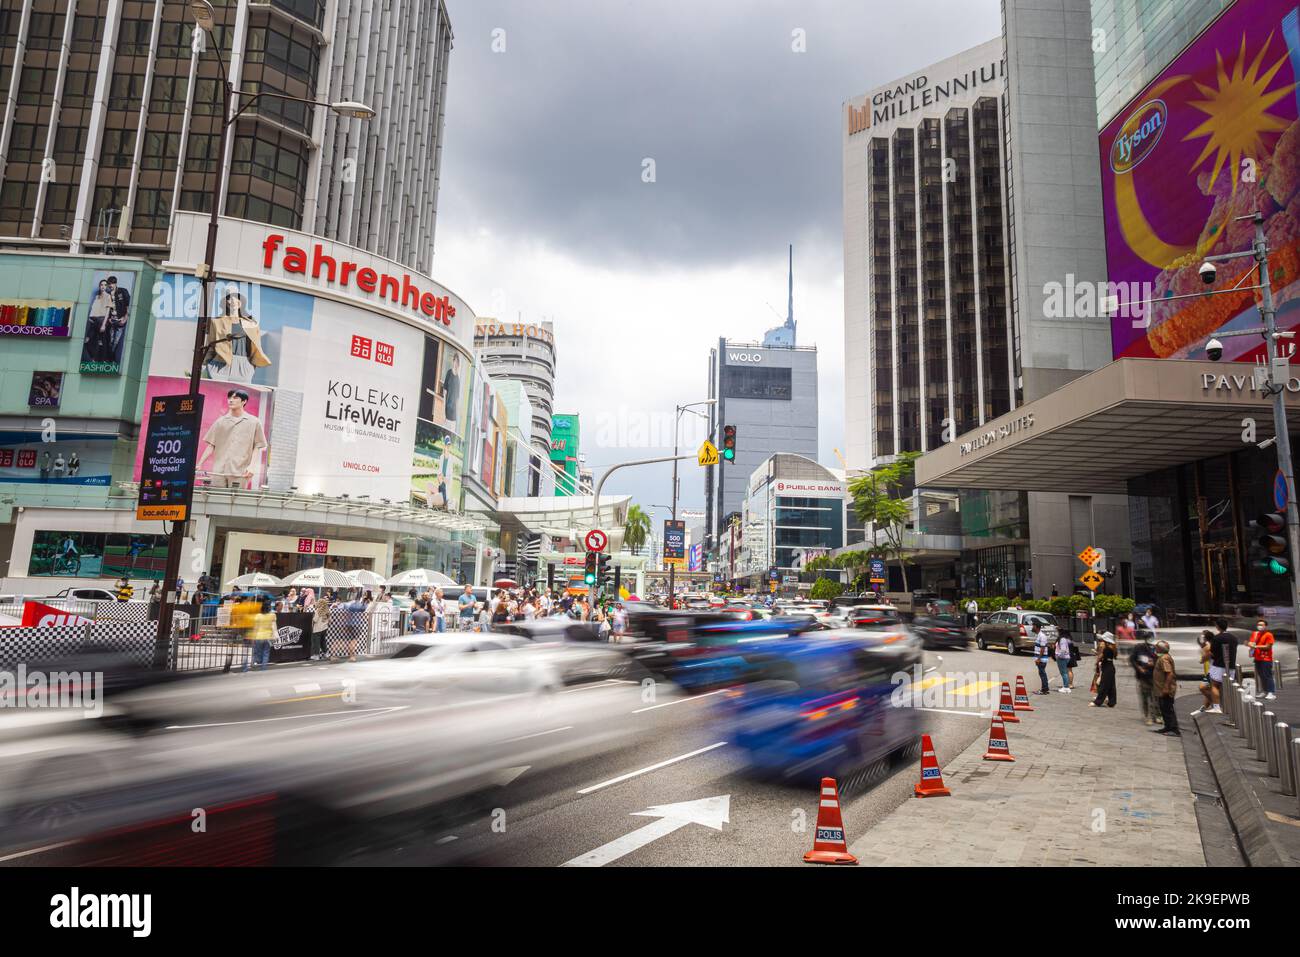 Kuala Lumpur, Malaysia - August 21, 2022: At Starhill Square in front of the Pavilion Shopping mall in the KL city center. One of the most busiest str Stock Photo